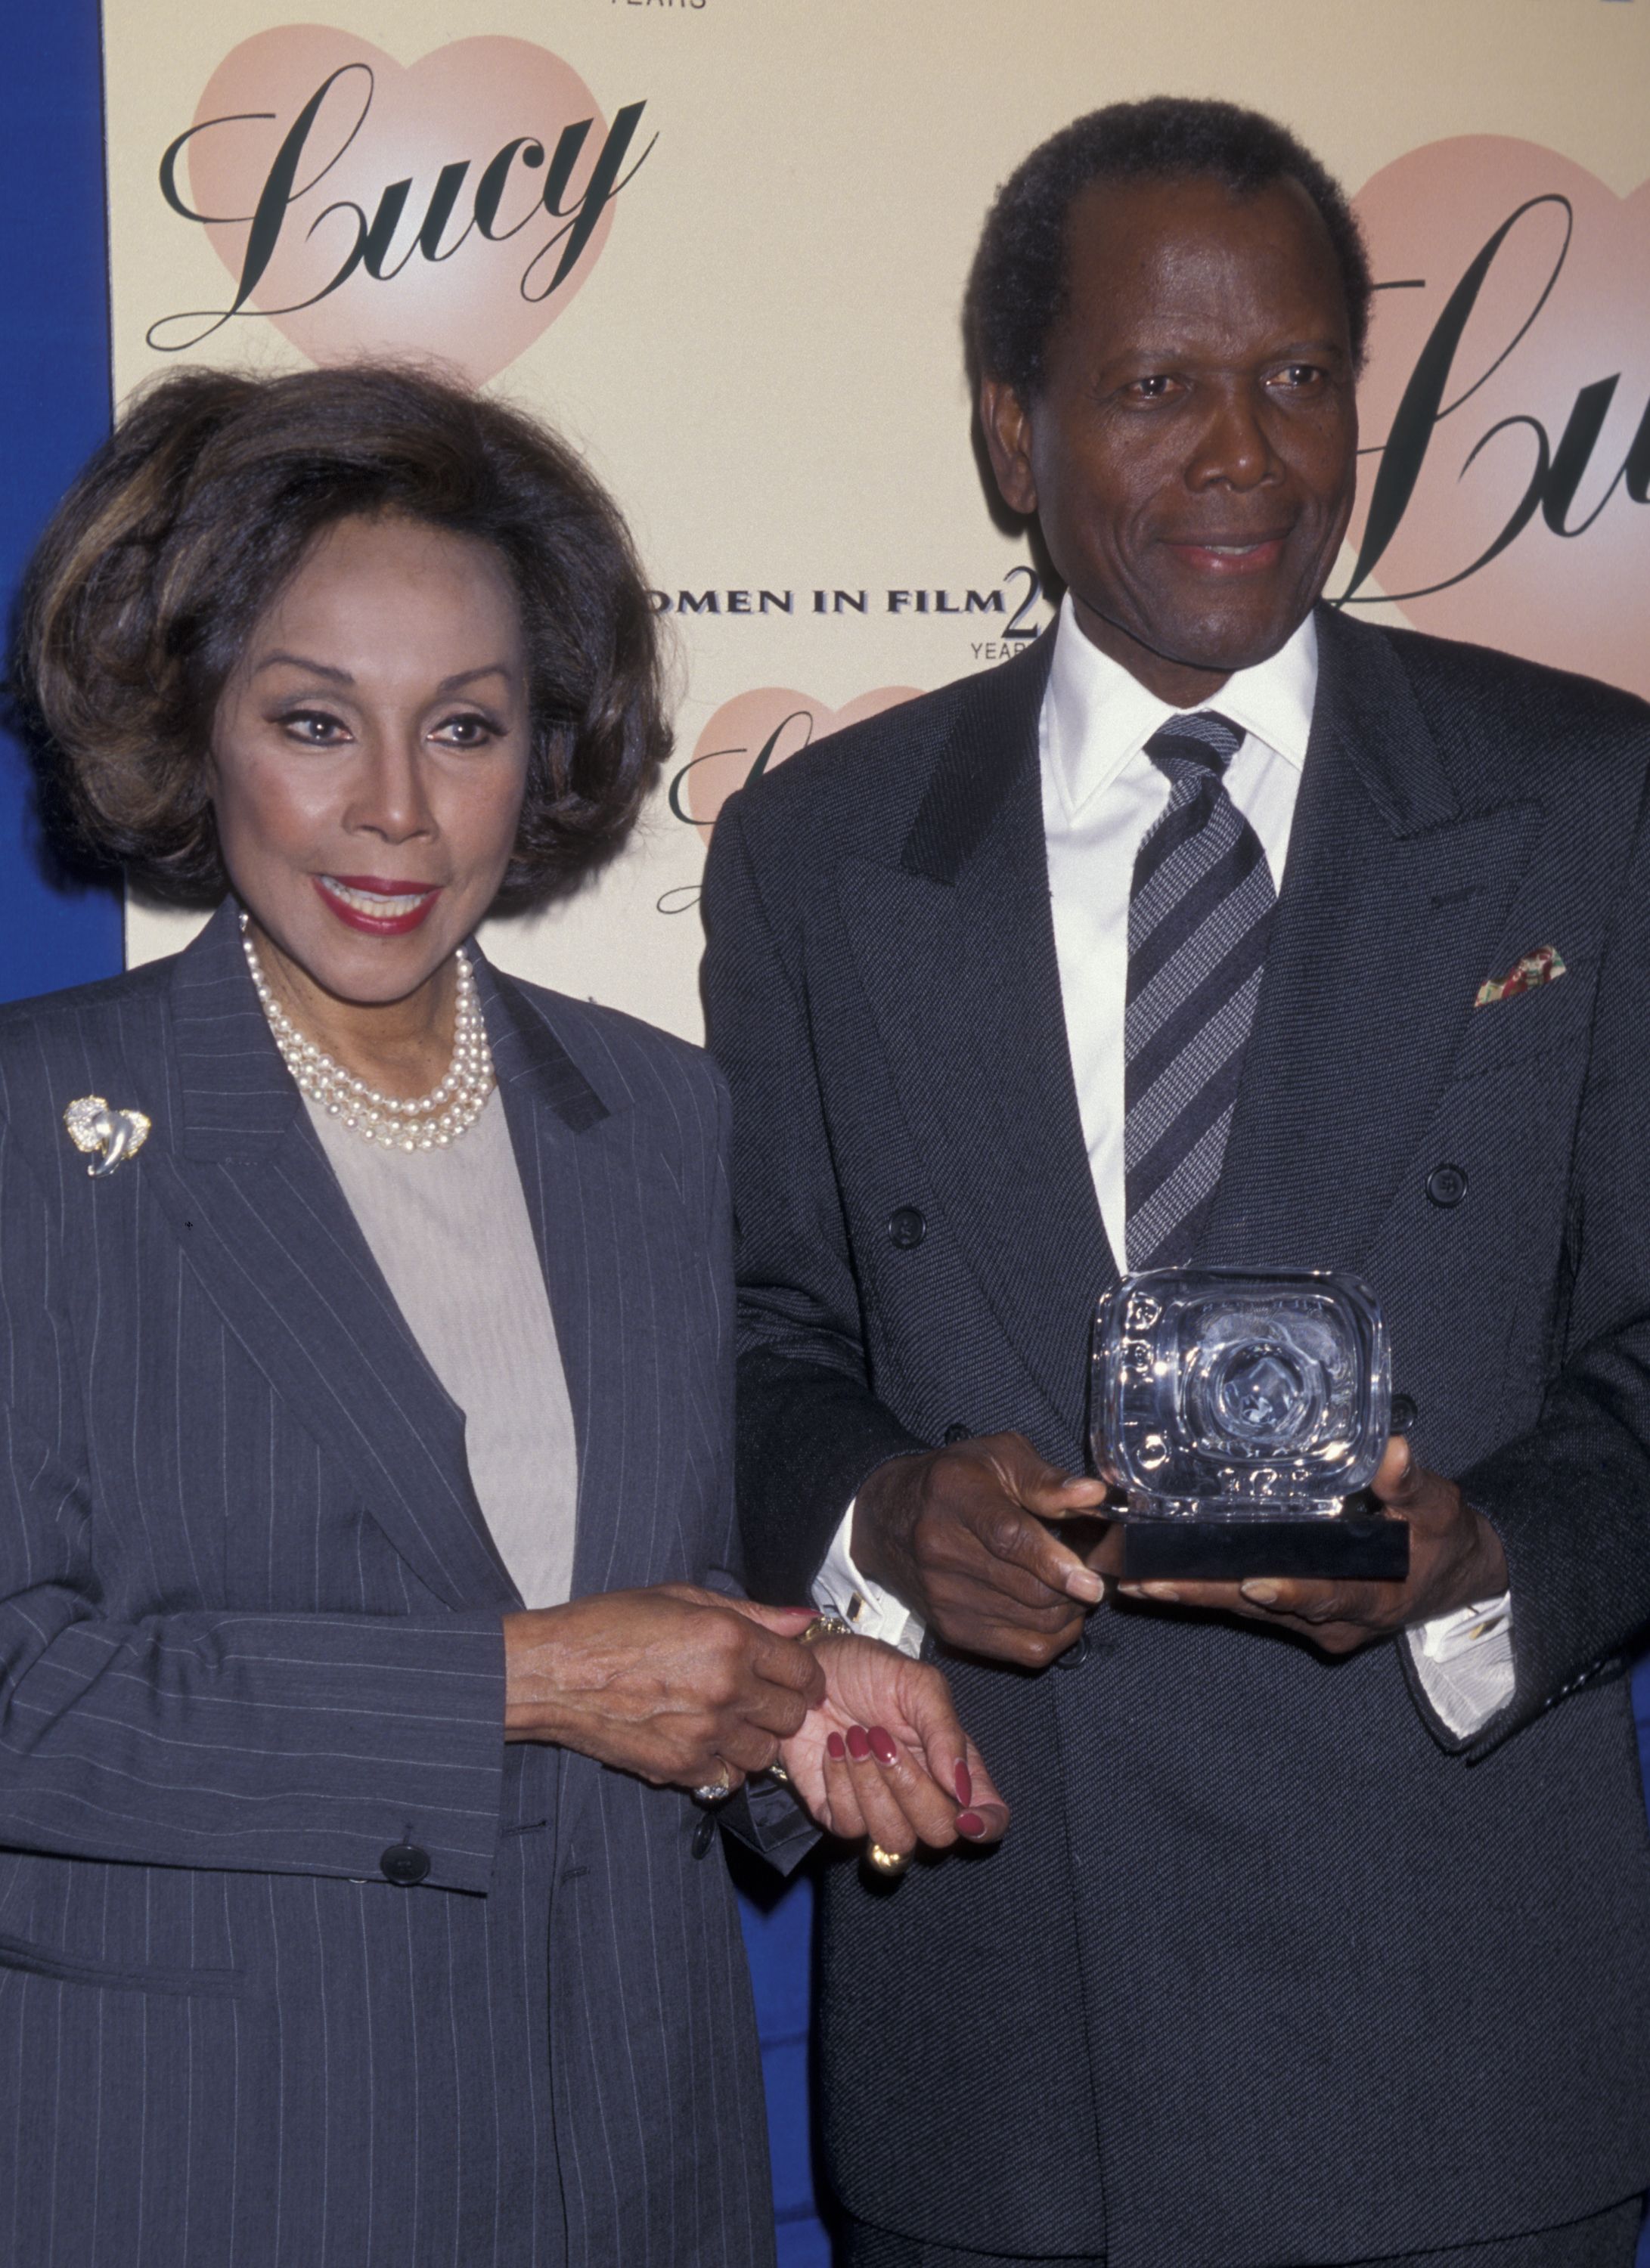 Diahann Carroll and Sidney Poitier during the Fifth Annual Women in Film Lucy Awards on September 12, 1998 at the Beverly Wilshire Hotel in Beverly Hills, California. | Source: Getty Images